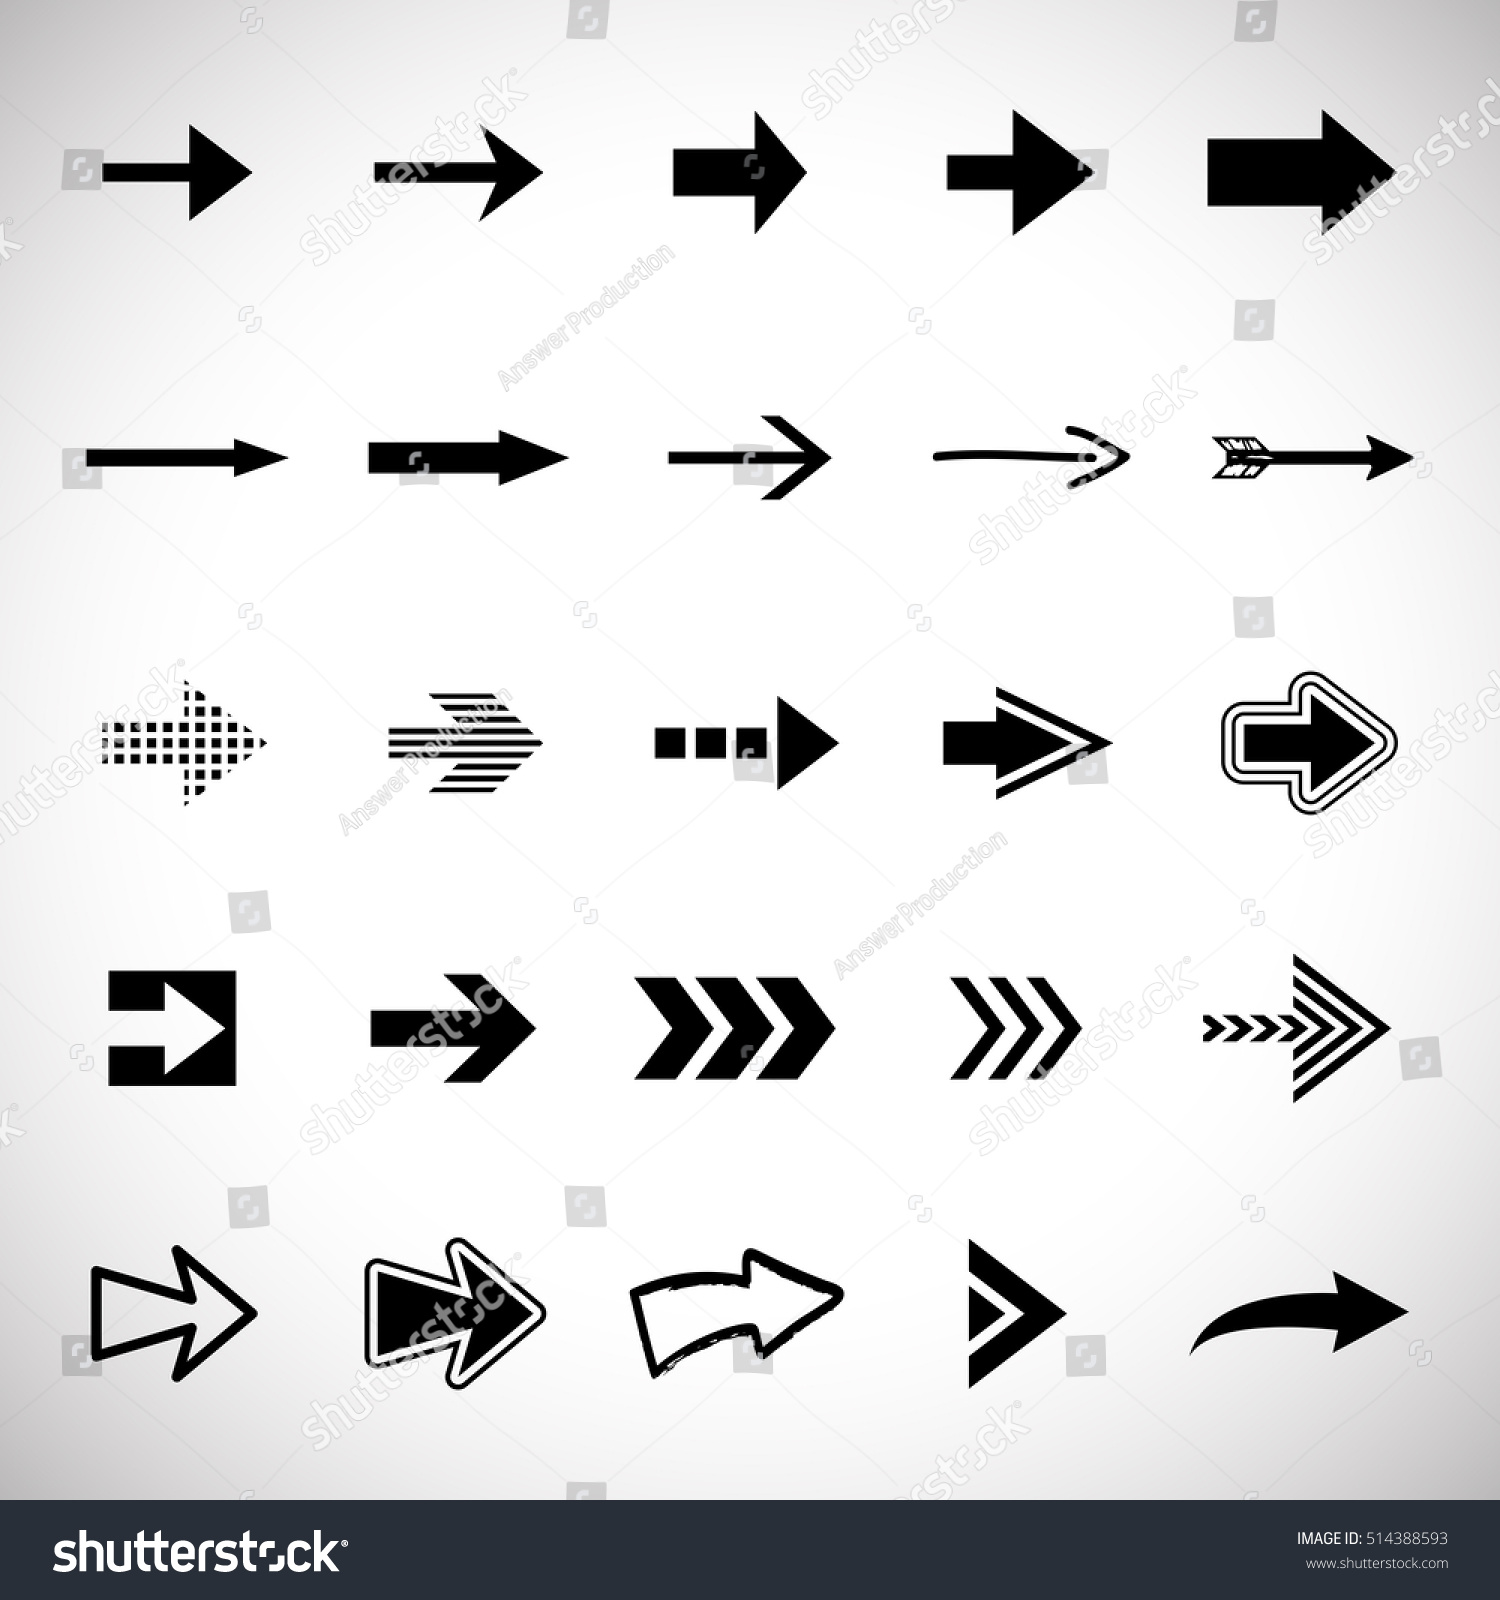 Arrow icons set - vector illustration. Different shape - isolated on gray background, graphic design. Modern color style #514388593